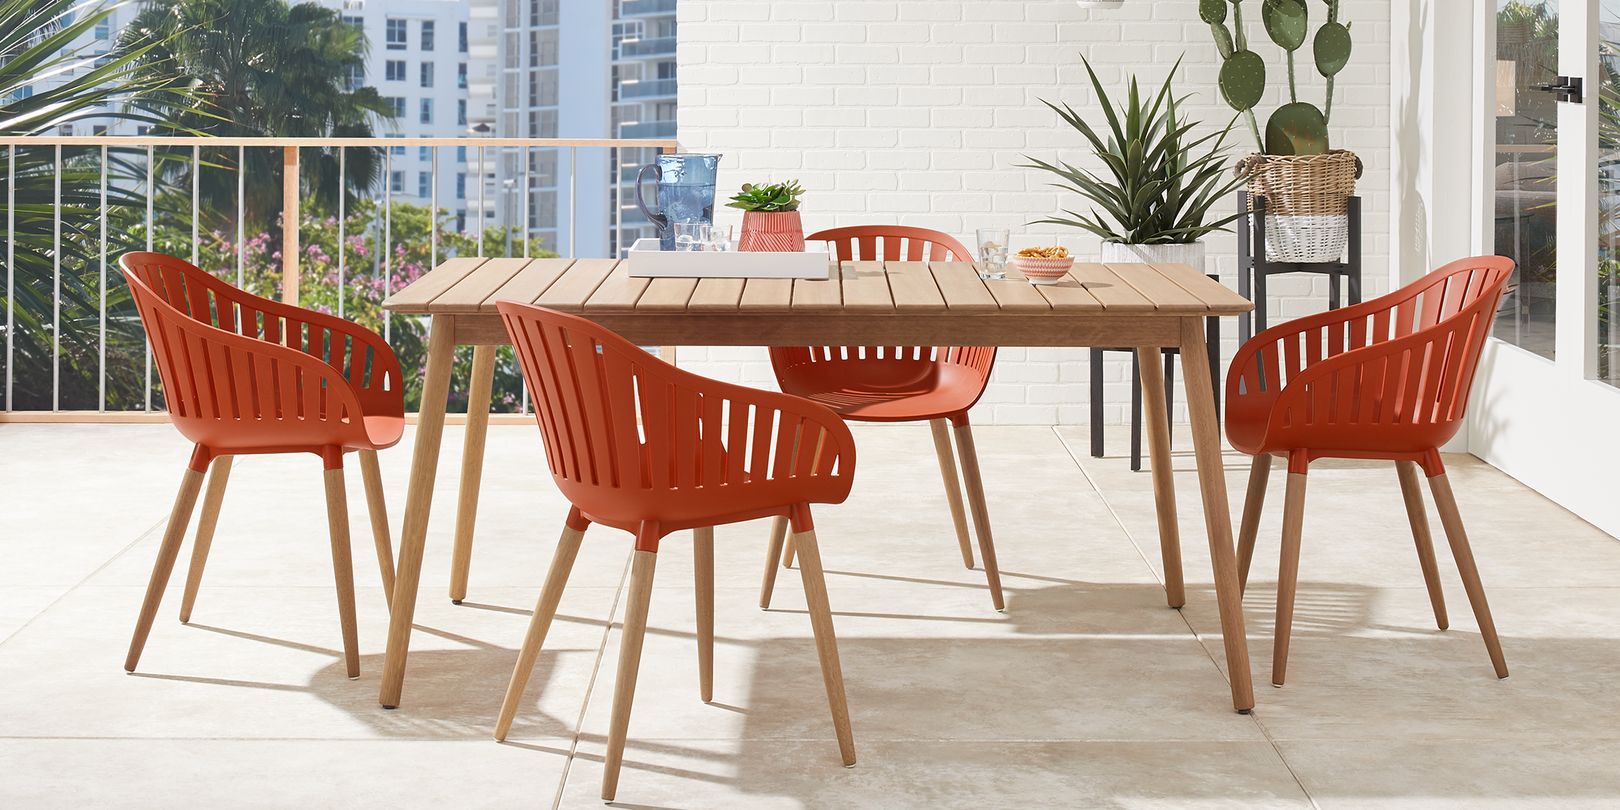 photo of a teak dining table and four orange chairs